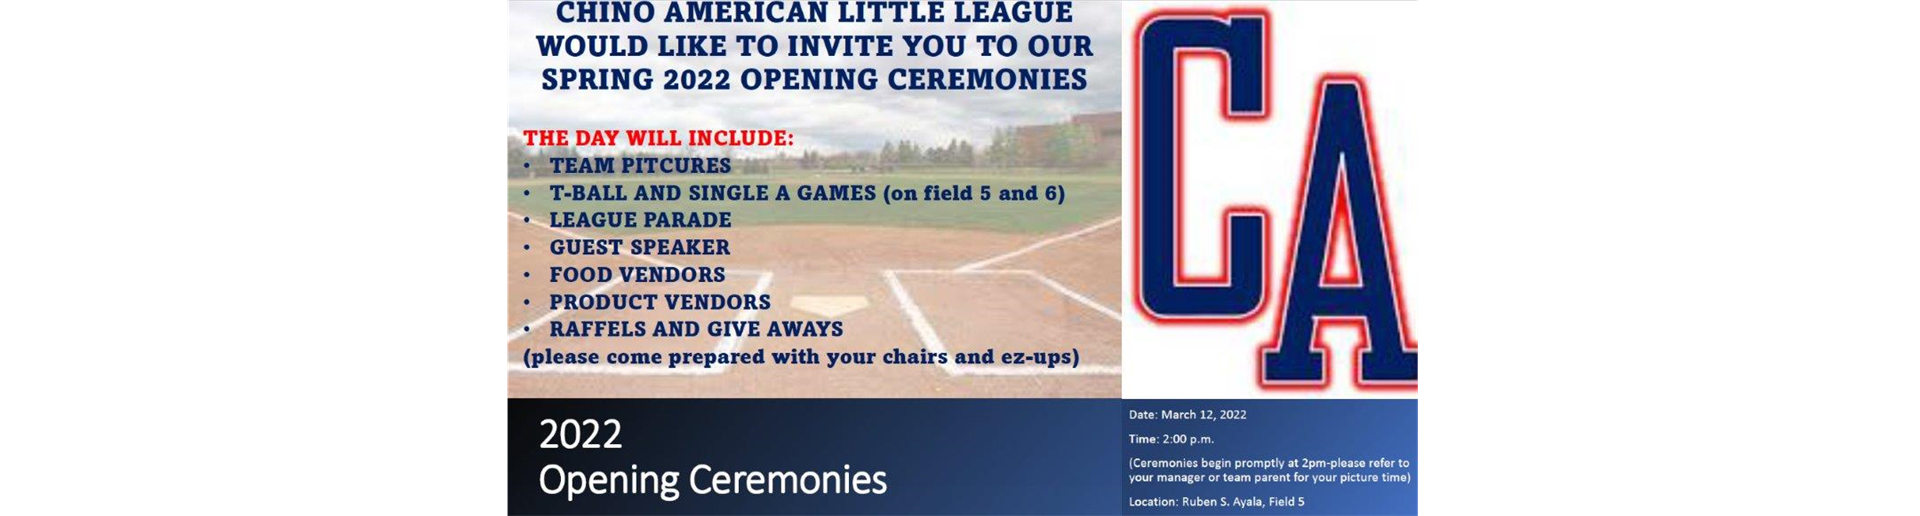 Spring 2022 Opening Day